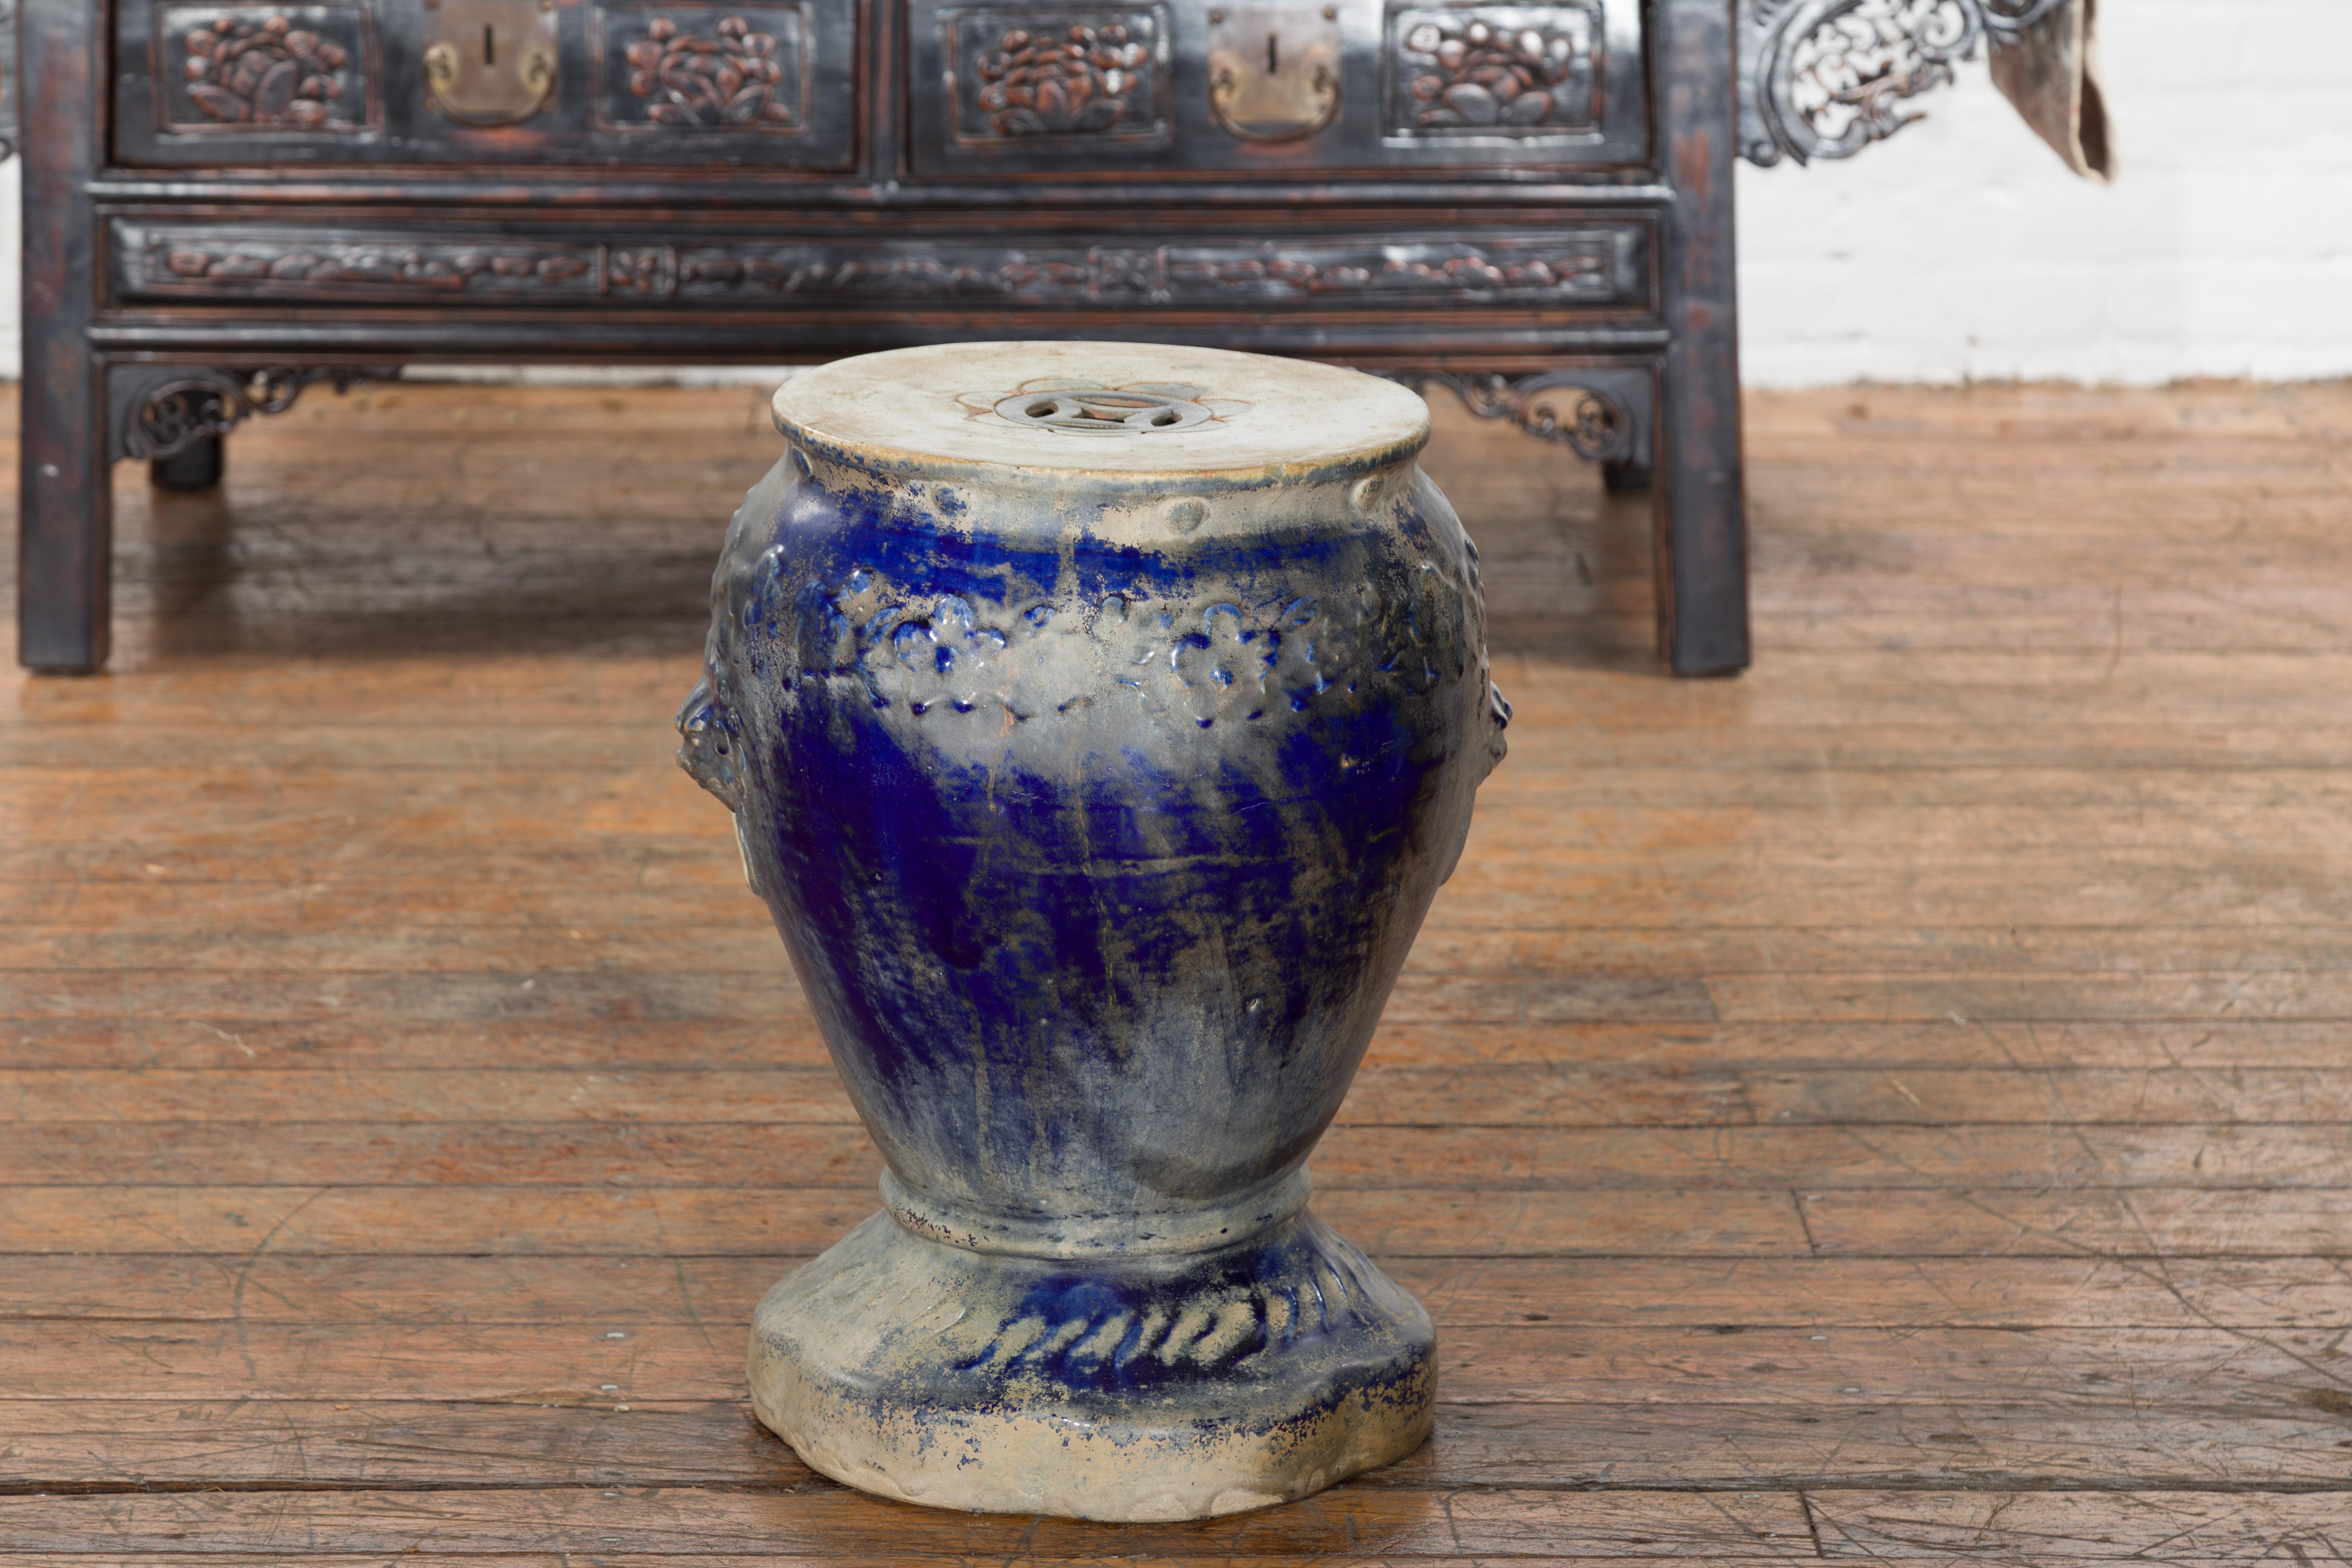 Chinese Qing Dynasty Period Blue Glazed Garden Seat with Floral Motifs on Base In Good Condition For Sale In Yonkers, NY